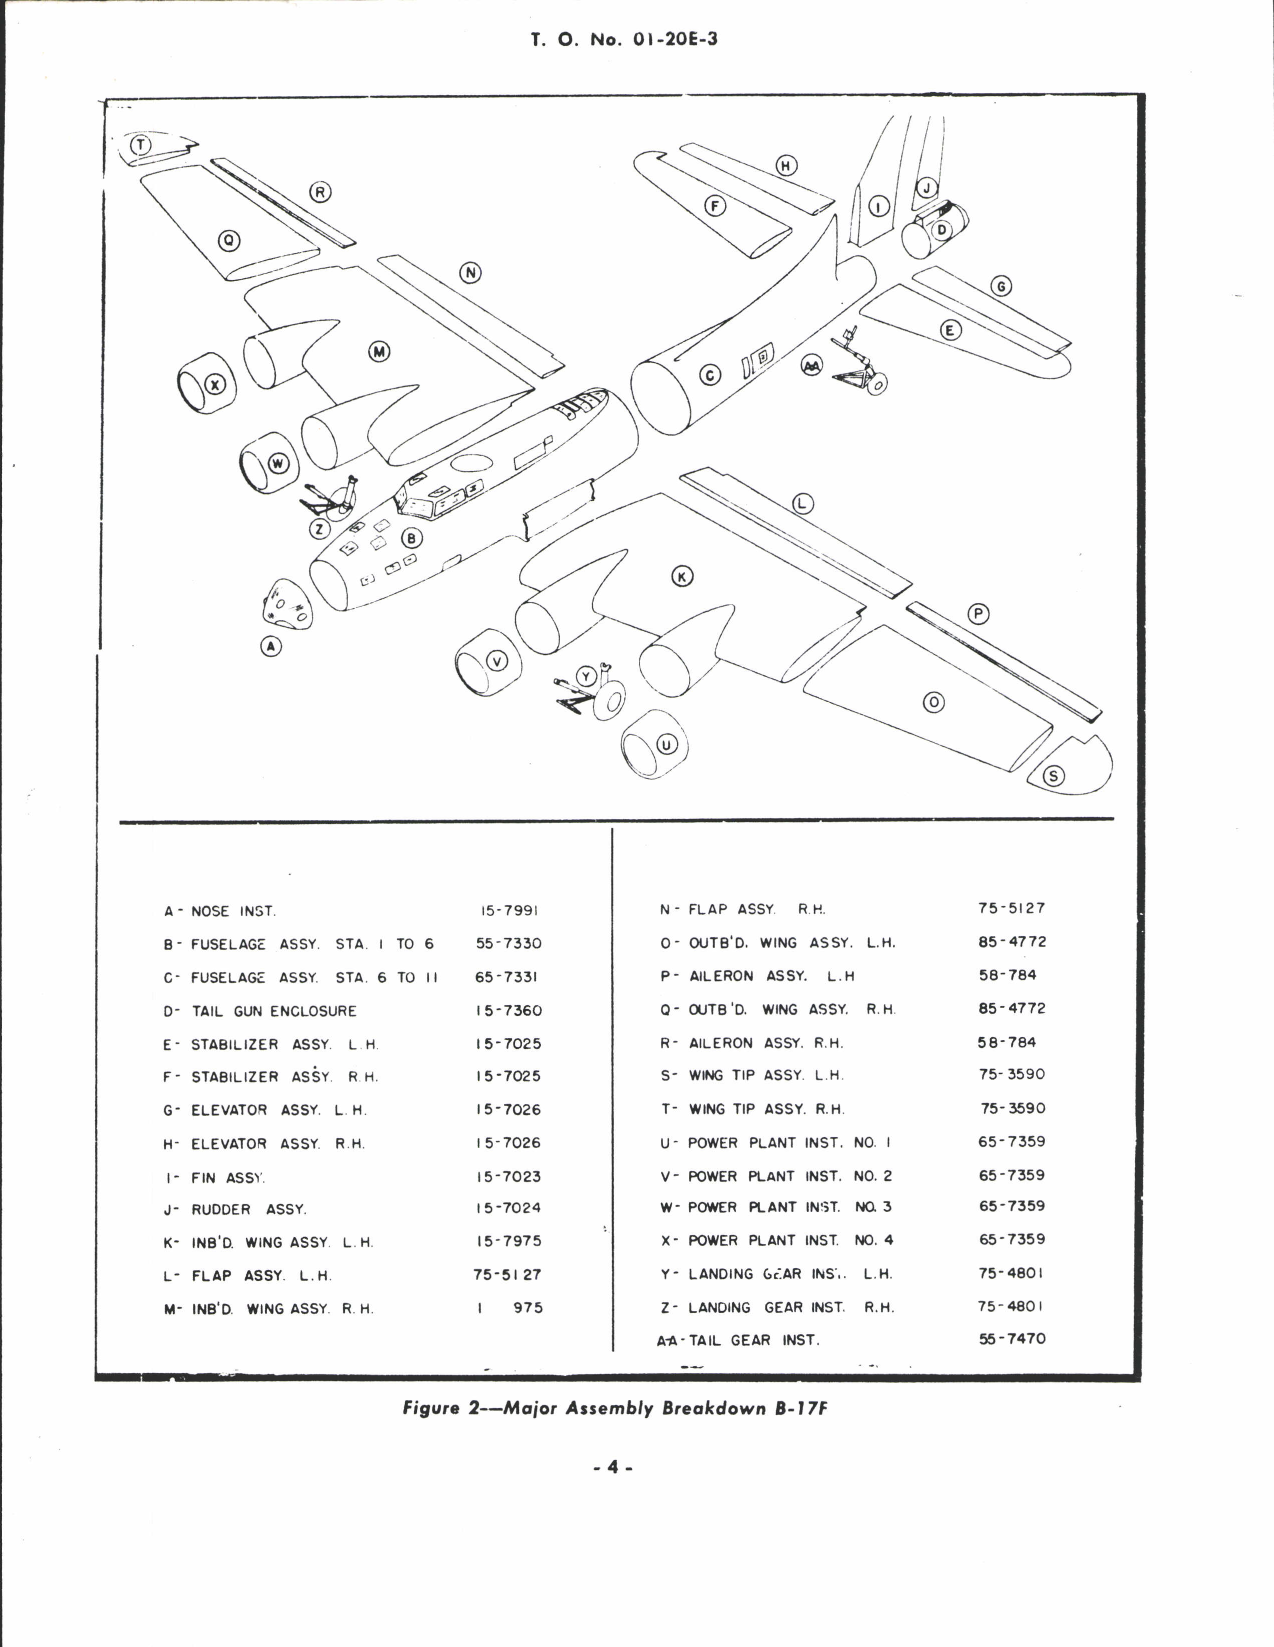 Sample page 8 from AirCorps Library document: Structural Repair Instructions for B-17E, F, G, RB-17E, and QB-17G